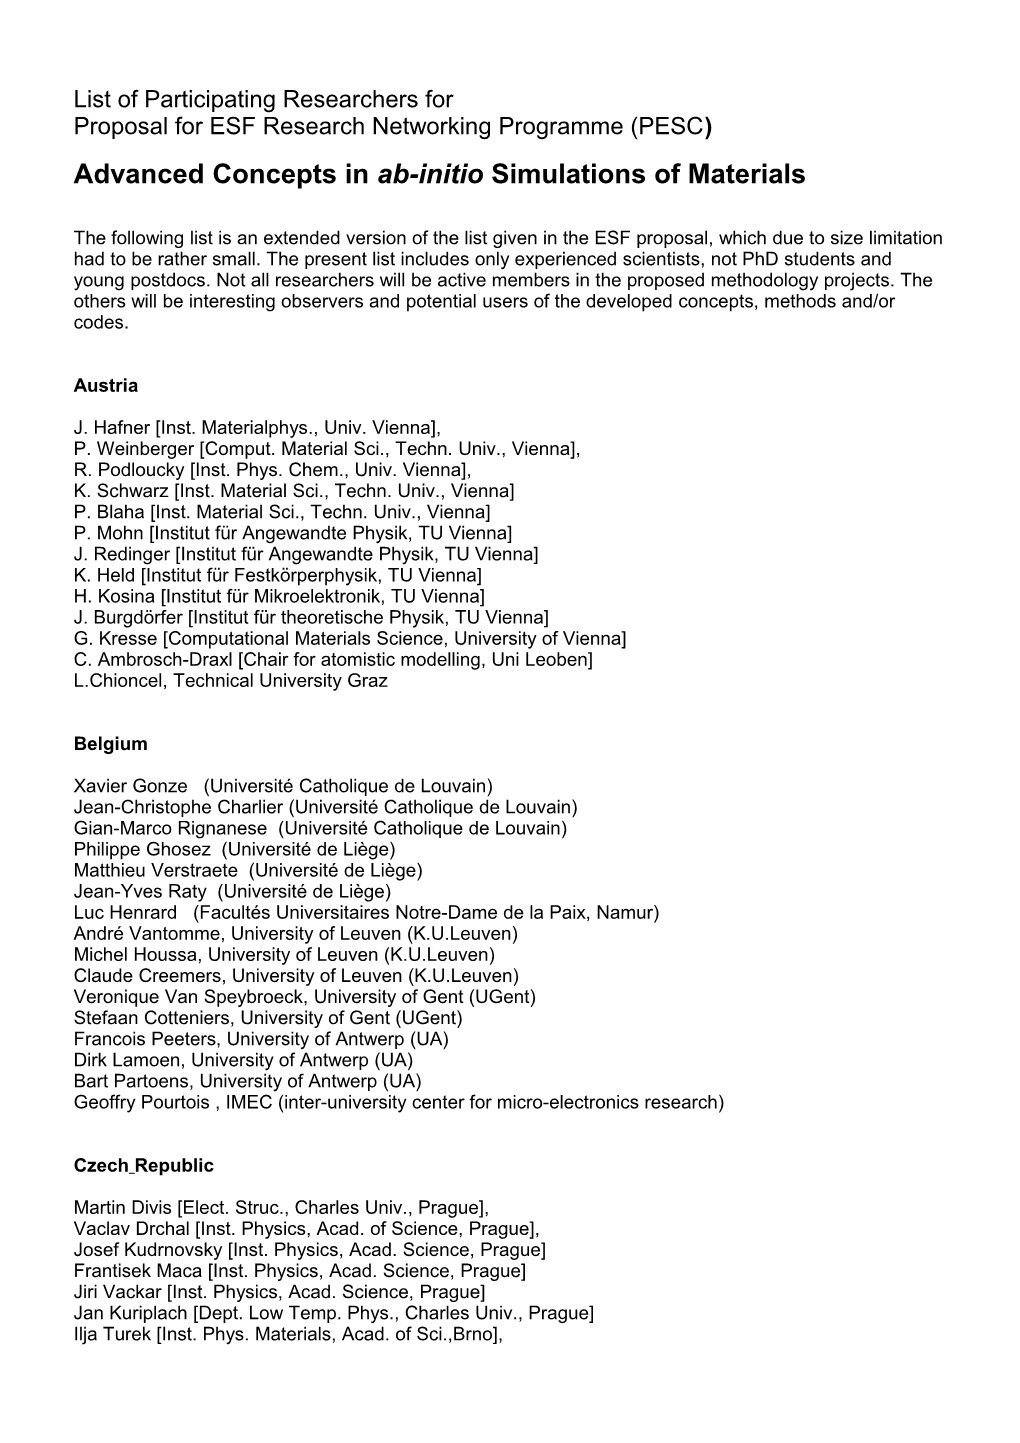 ANNEX C: PARTICIPANTS and THEIR COUNTRIES and AFFILIATIONS Note